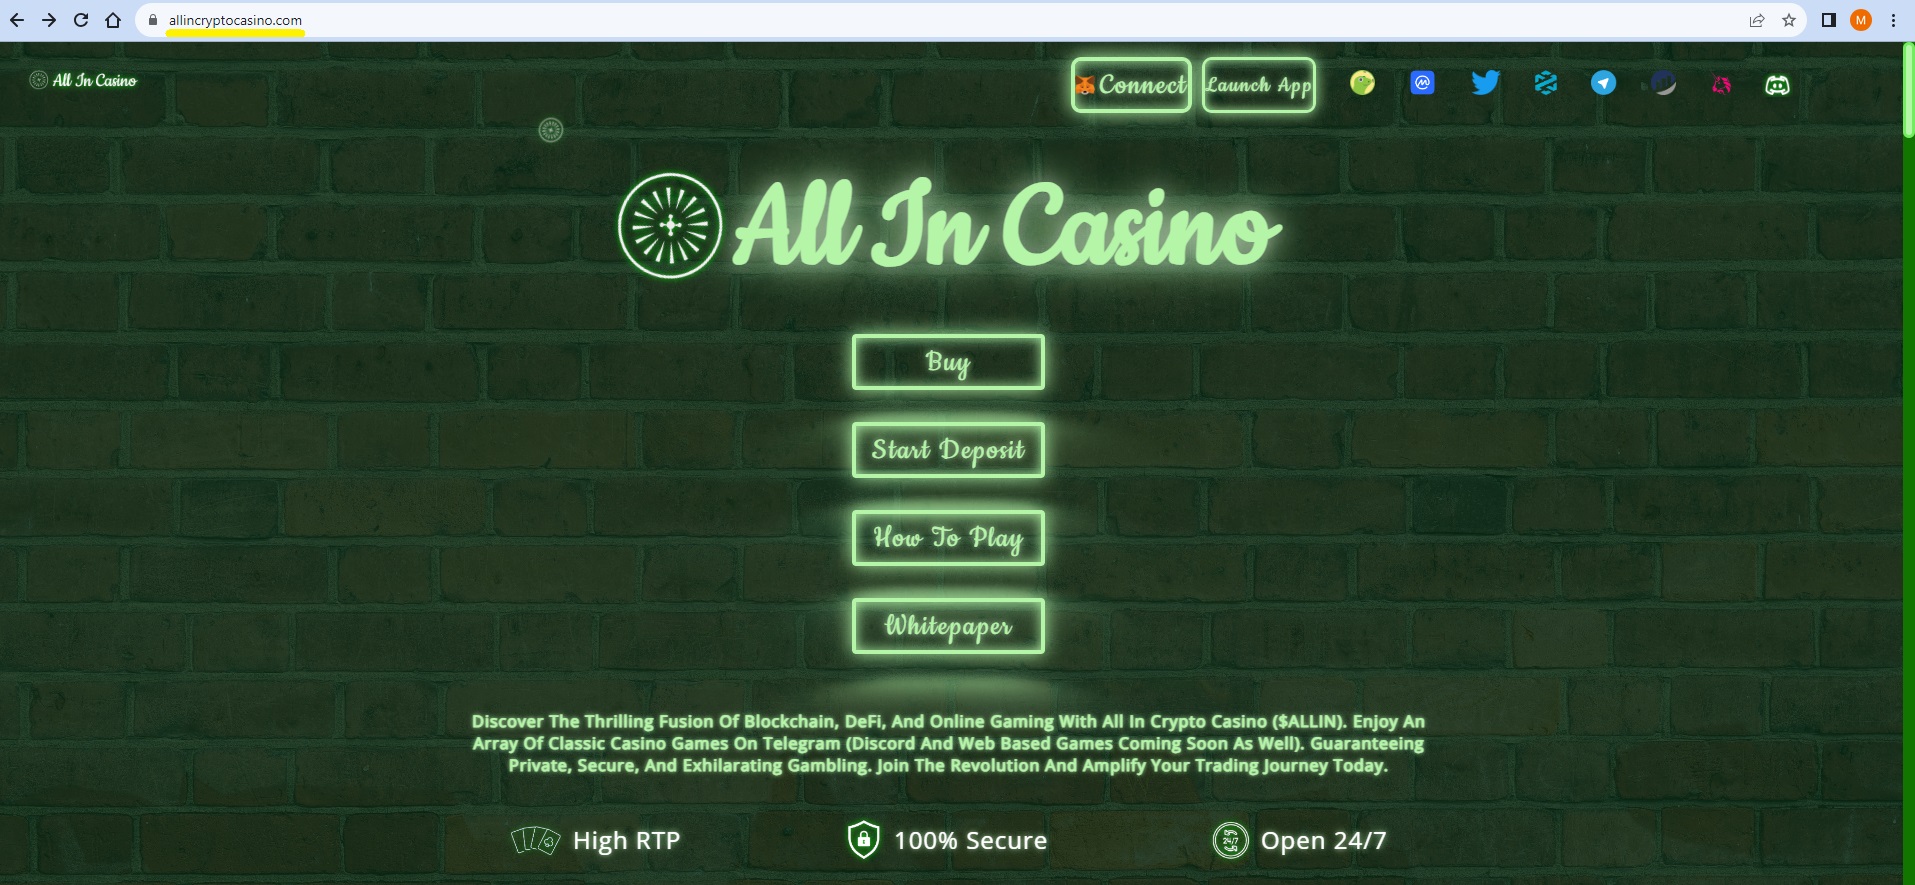 official website of the All In crypto casino project